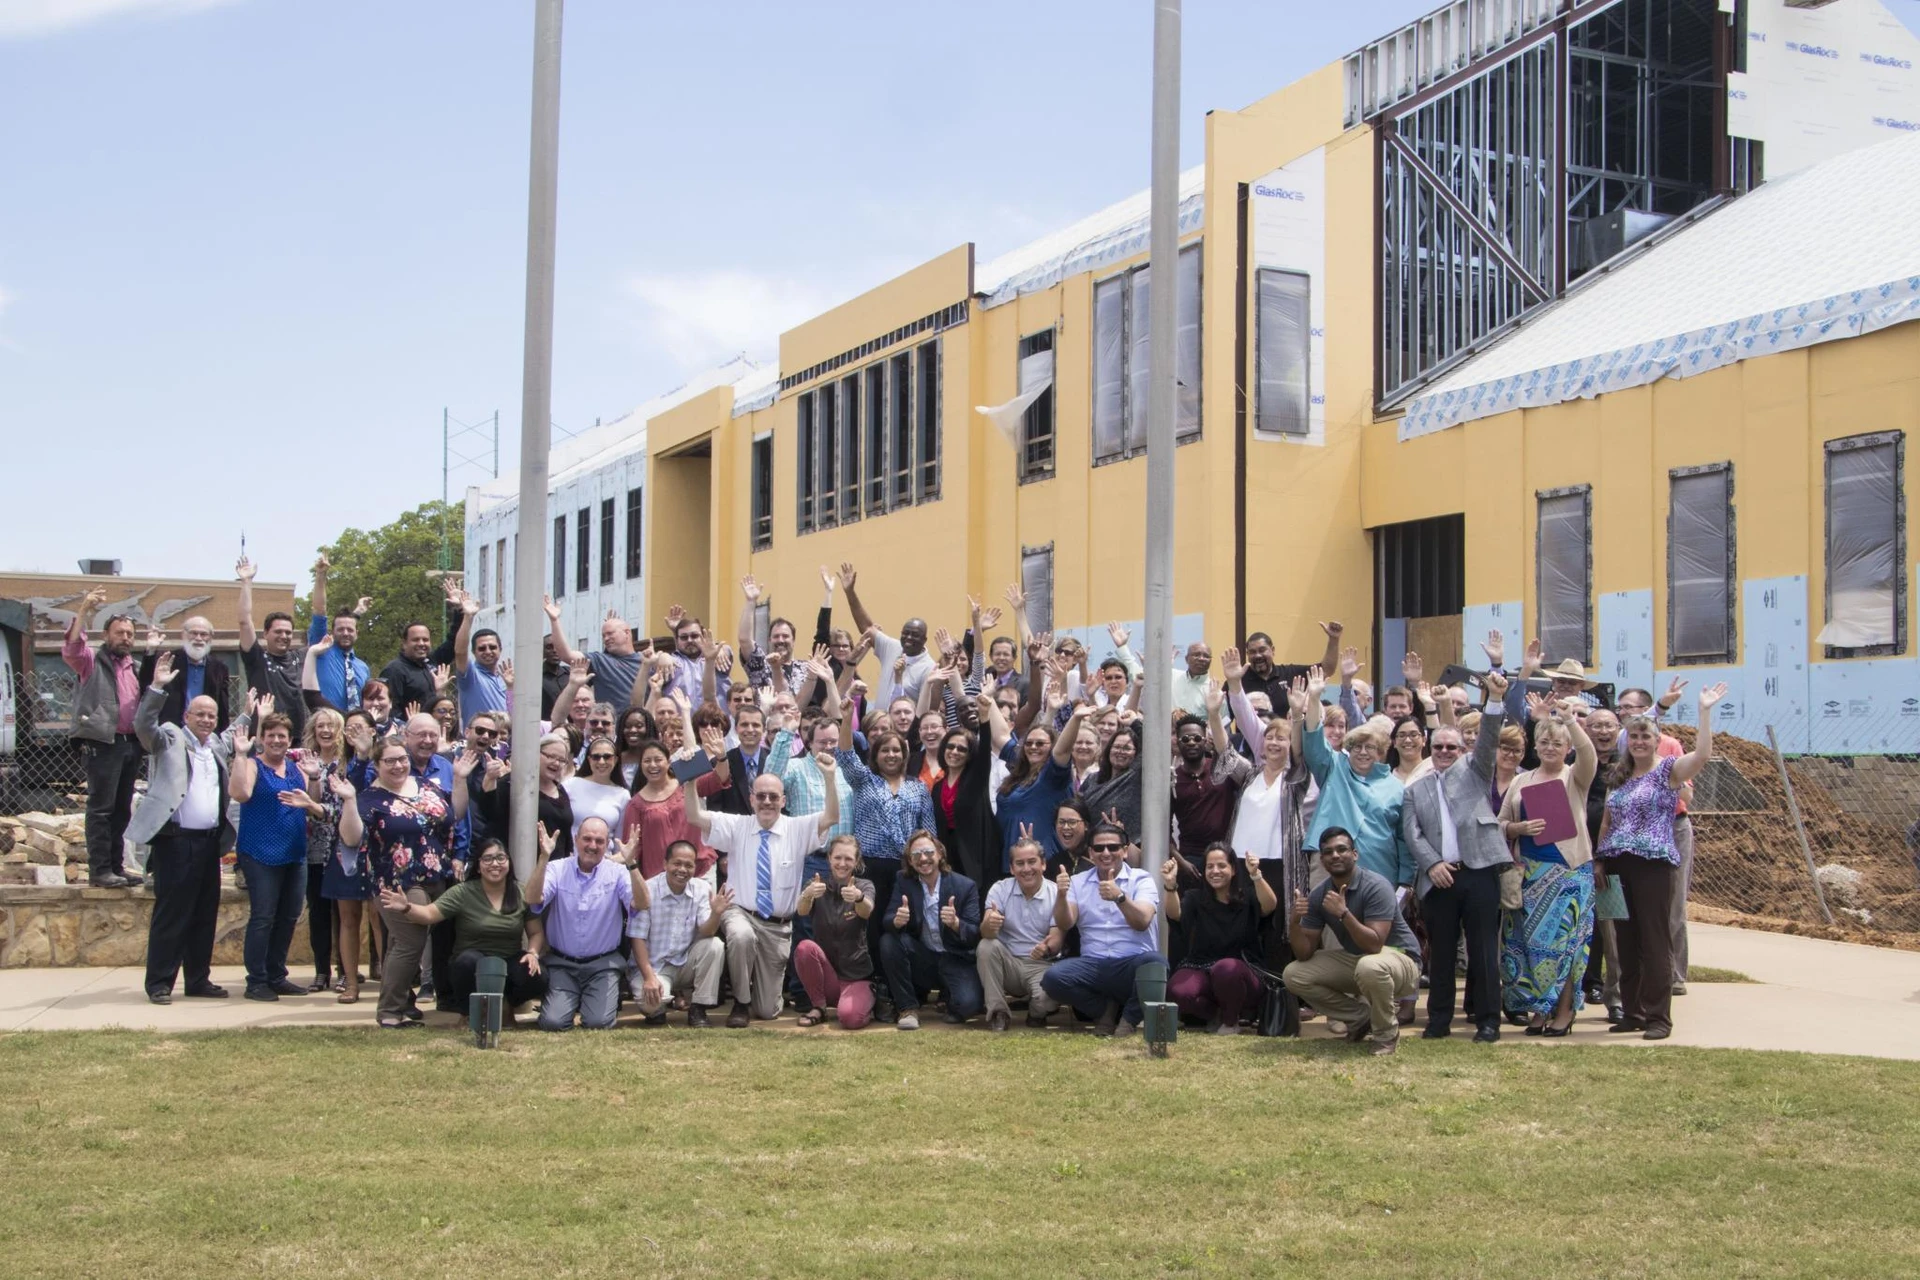 All the faculty and staff of SWAU stand in several rows in front of the new nursing building that is being built behind them